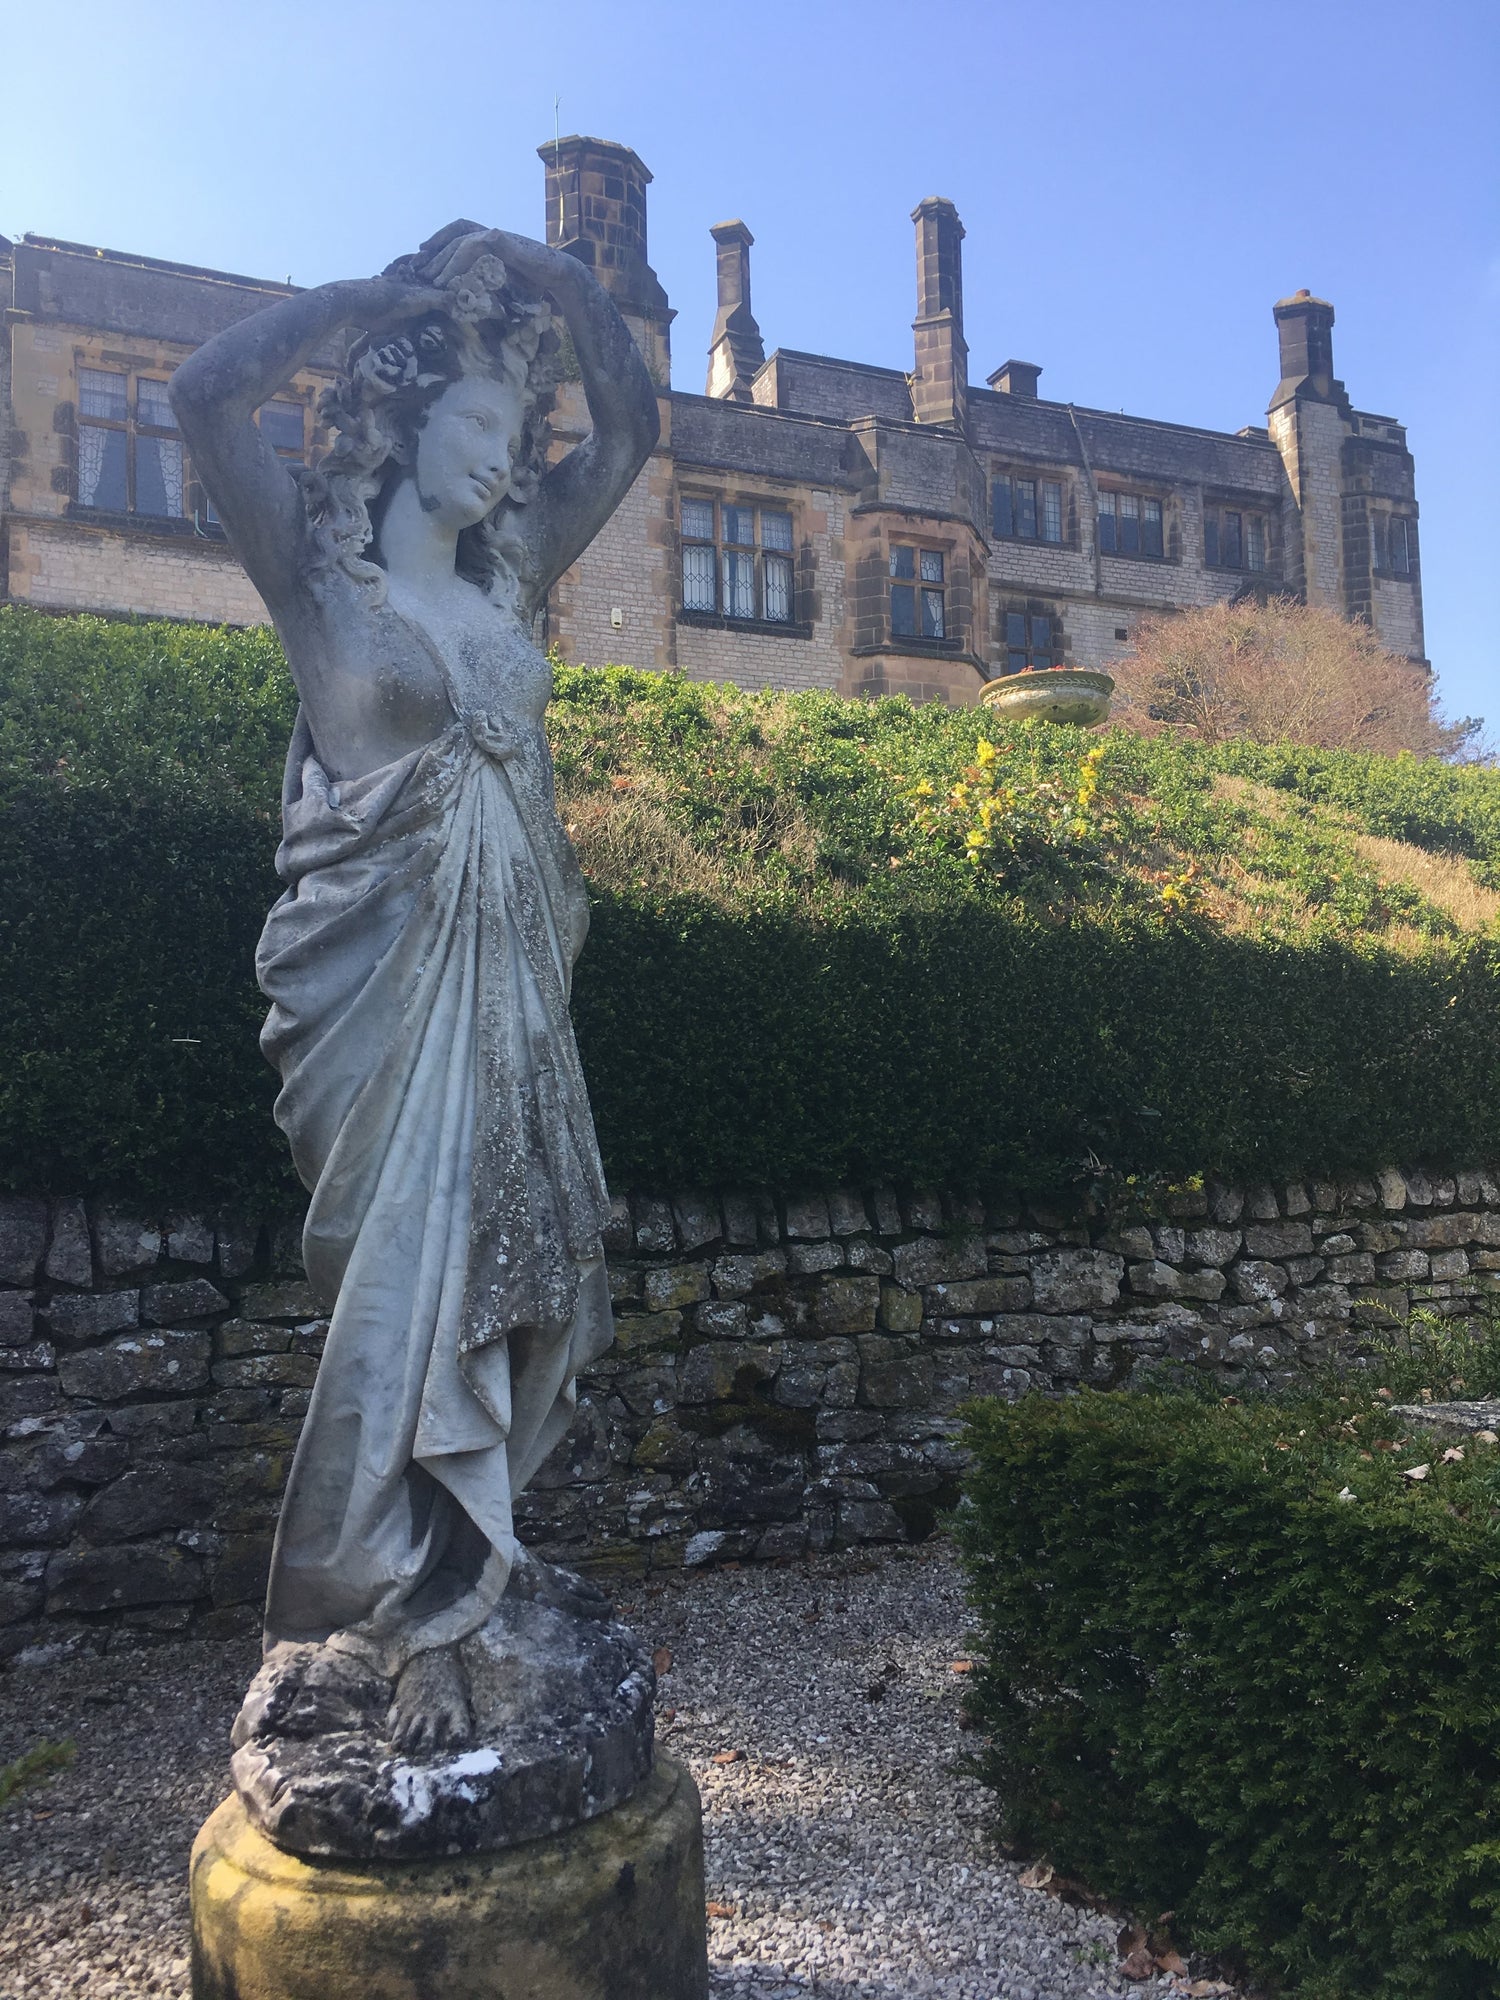 Image of Flora statue in the grounds of Thornbridge hall with the Hall in the background